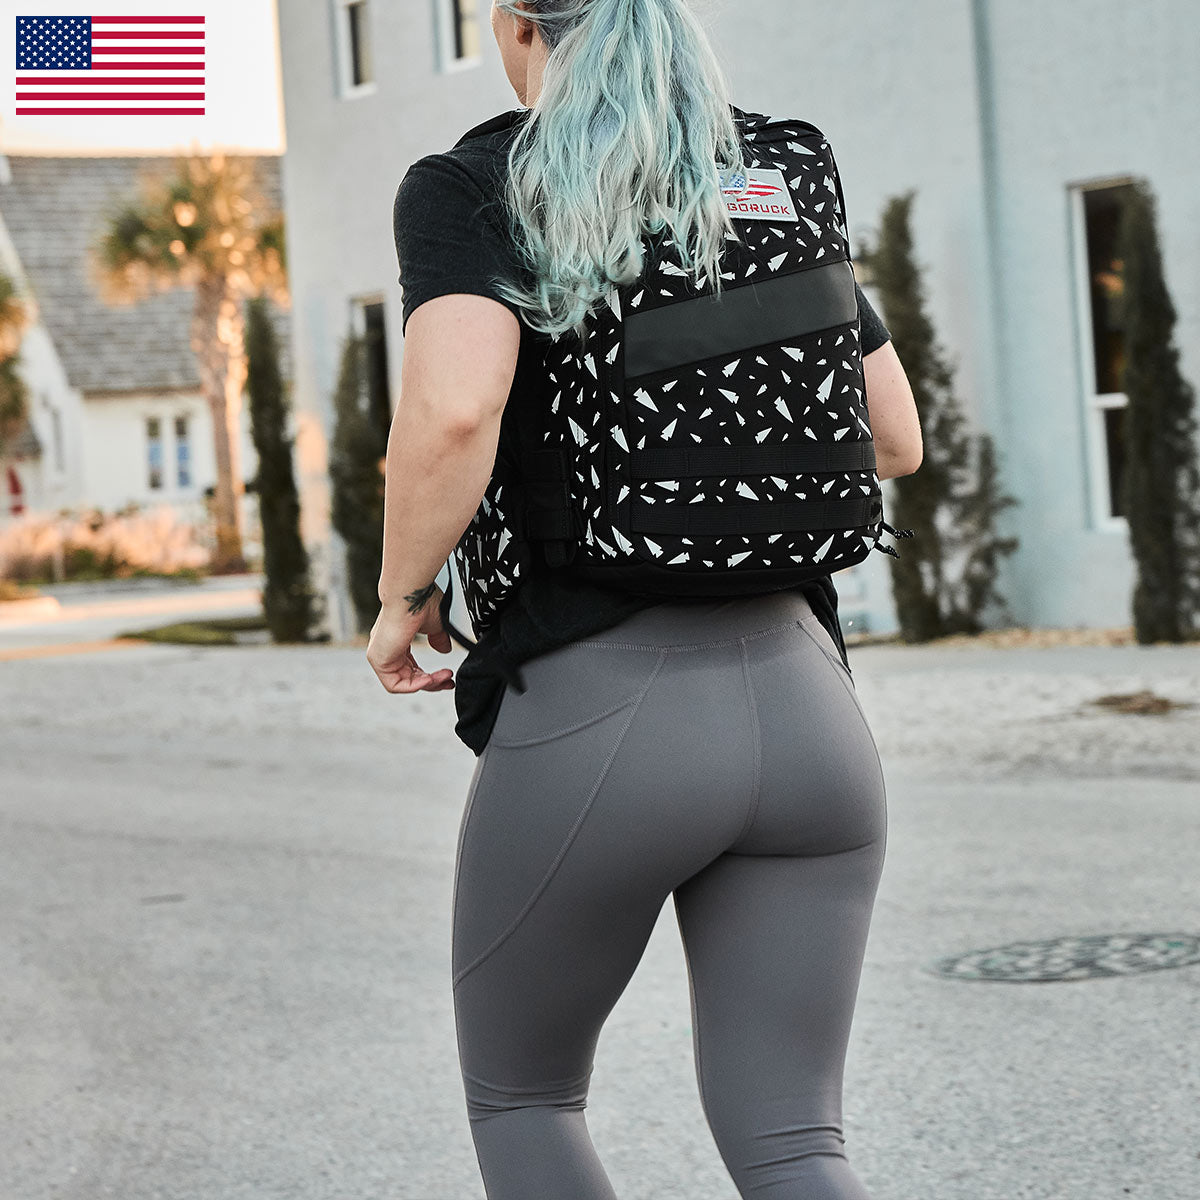 Yoga Pants for Women - Up to 70% off